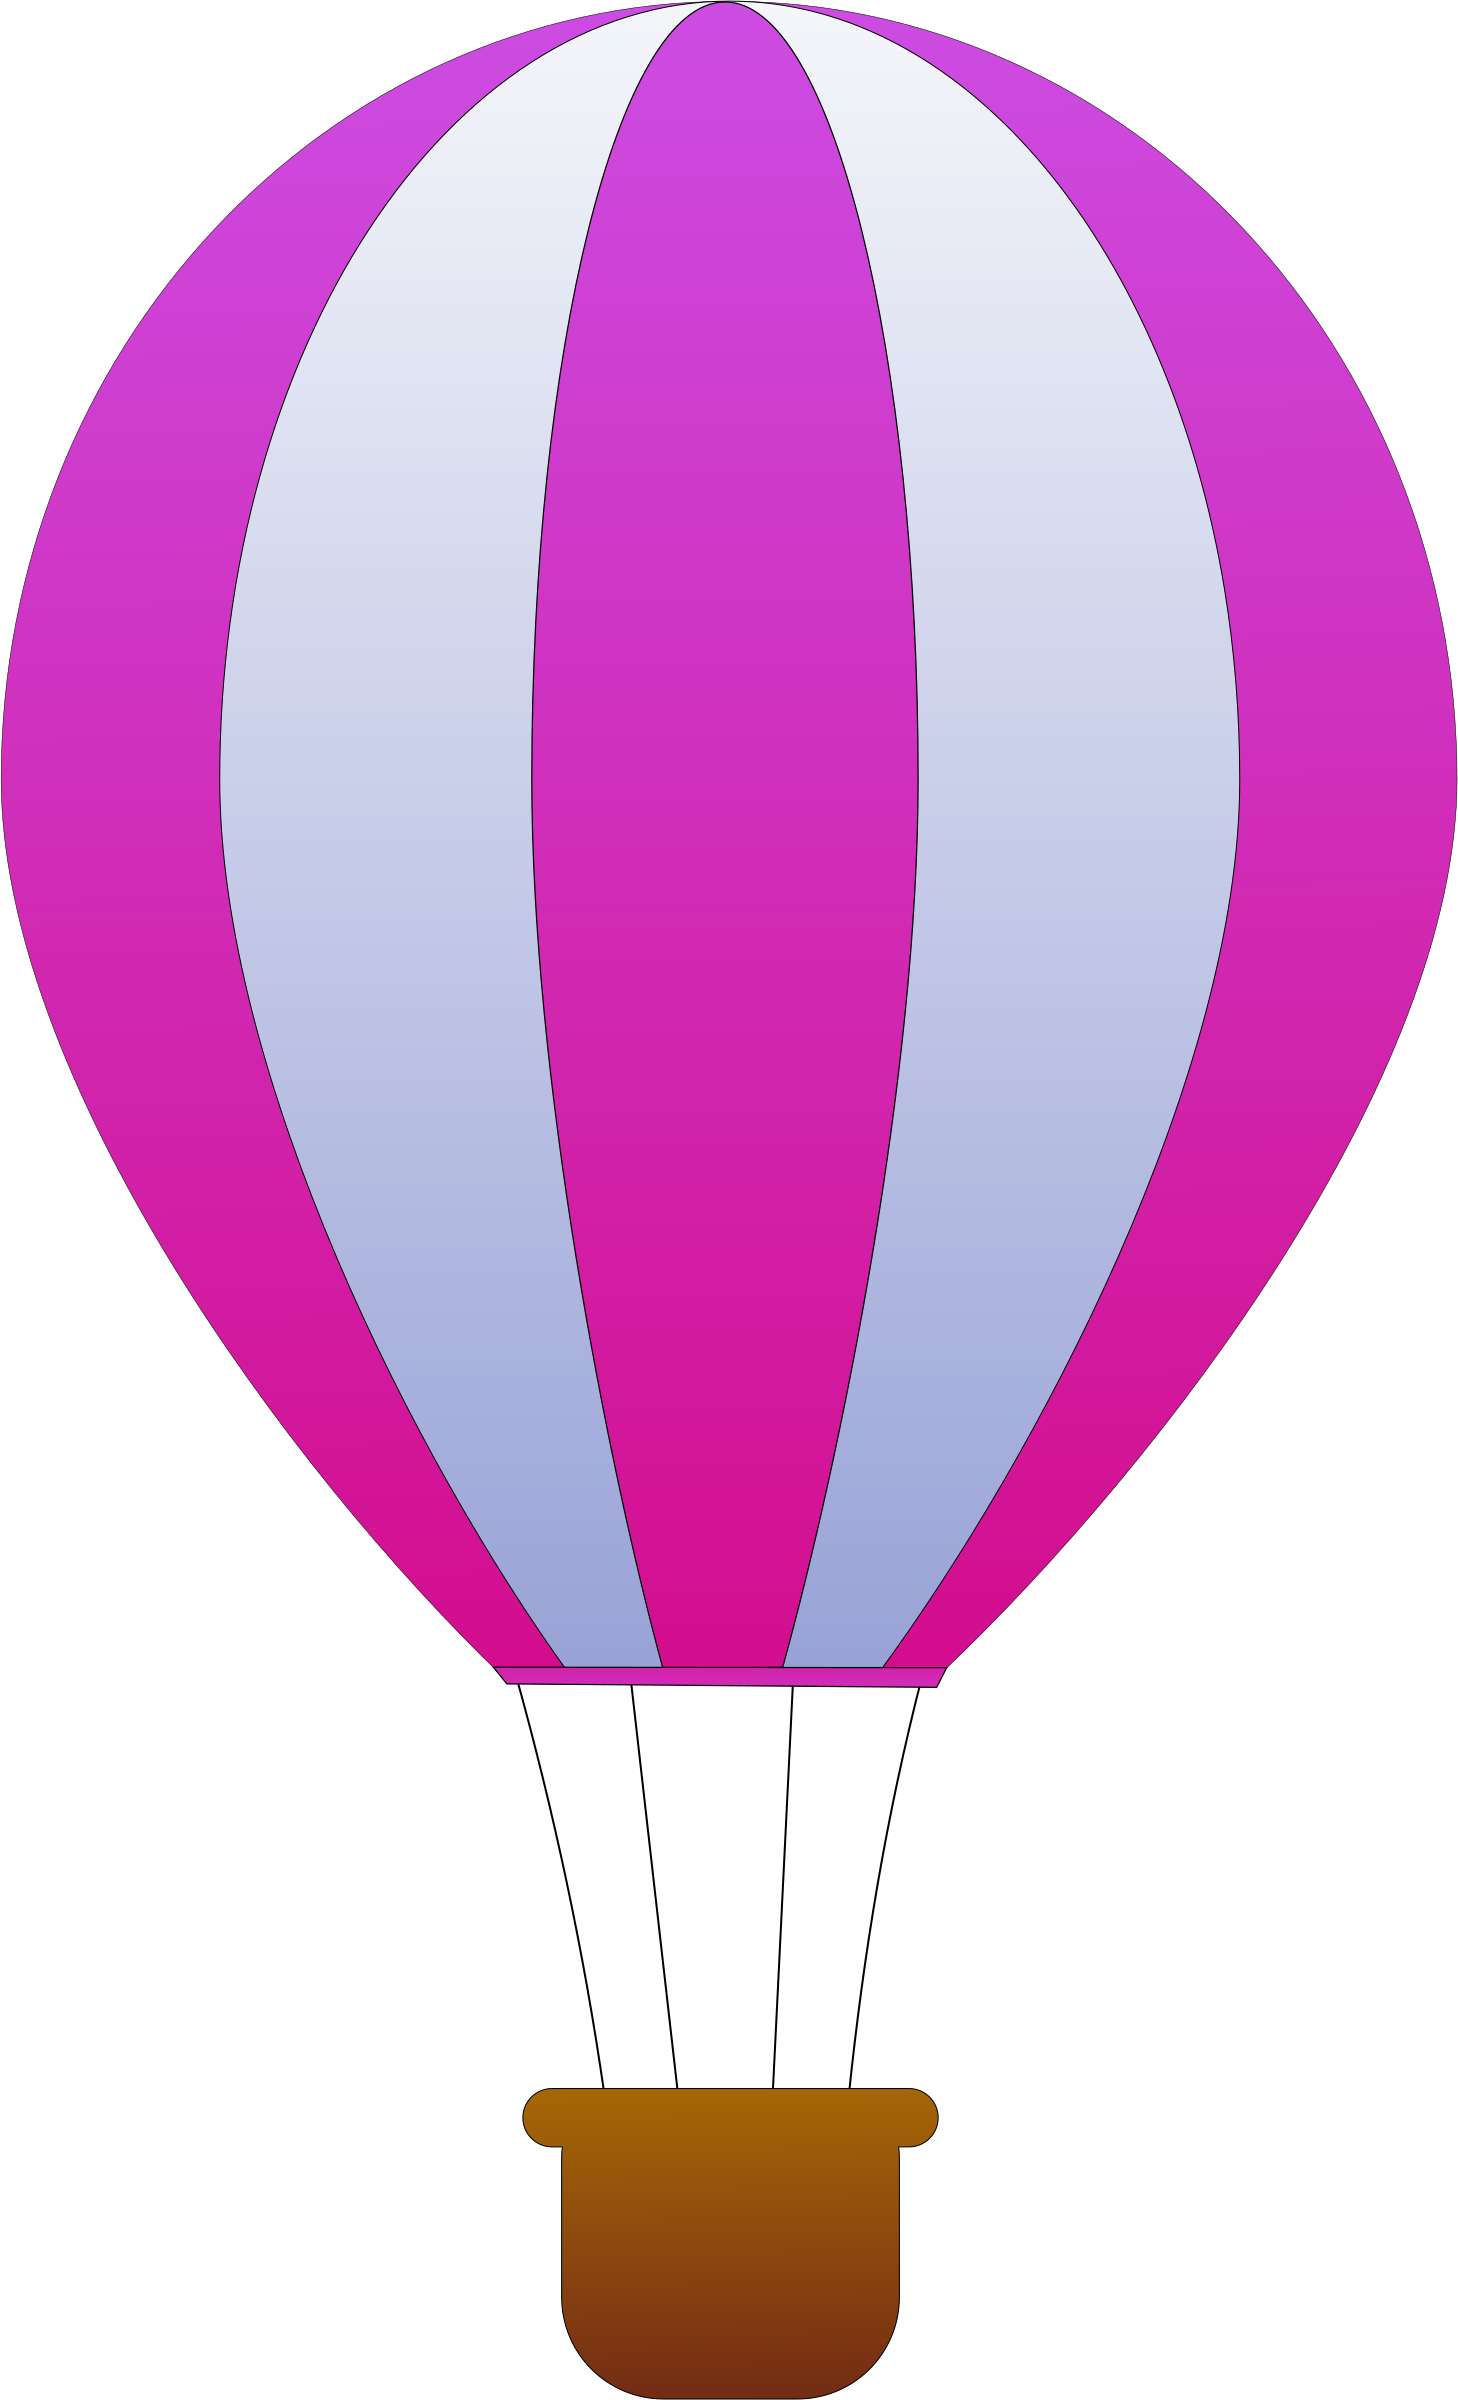 Balloon Vector Colorful Air Free Download Image PNG Image